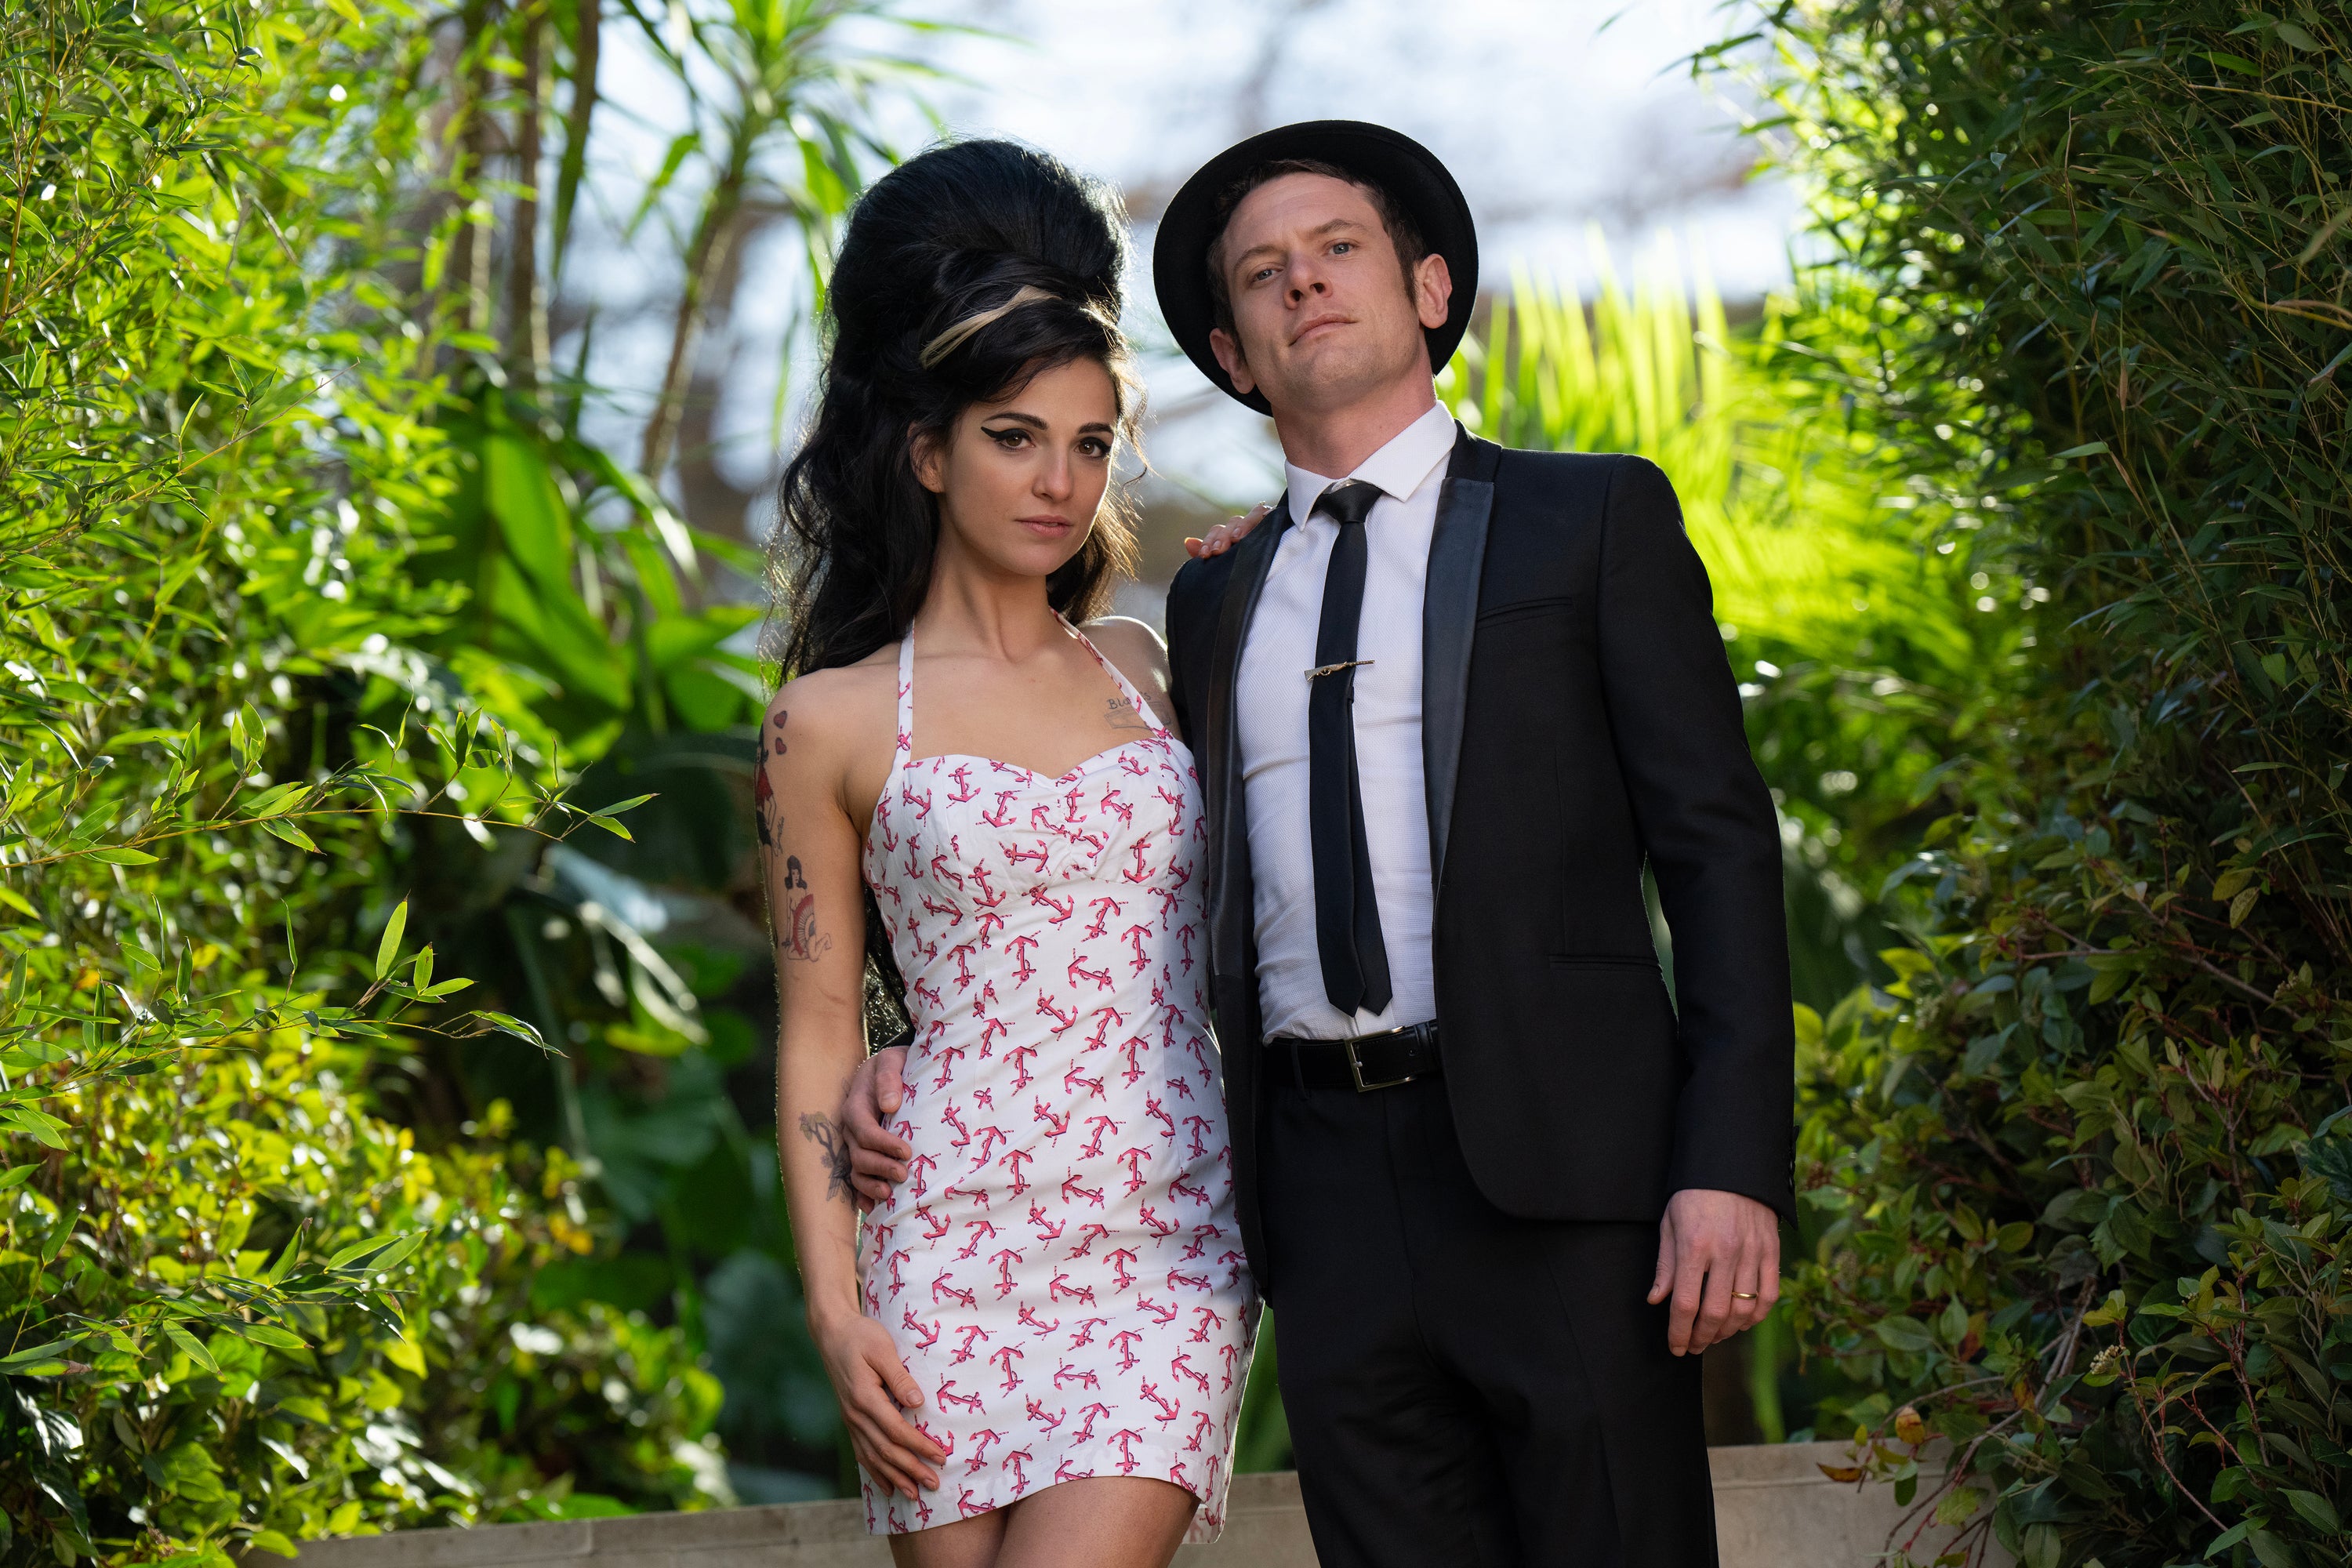 Marisa Abela (Amy Winehouse) and Jack O’Connell (Blake Fielder-Civil) in ‘Back to Black’